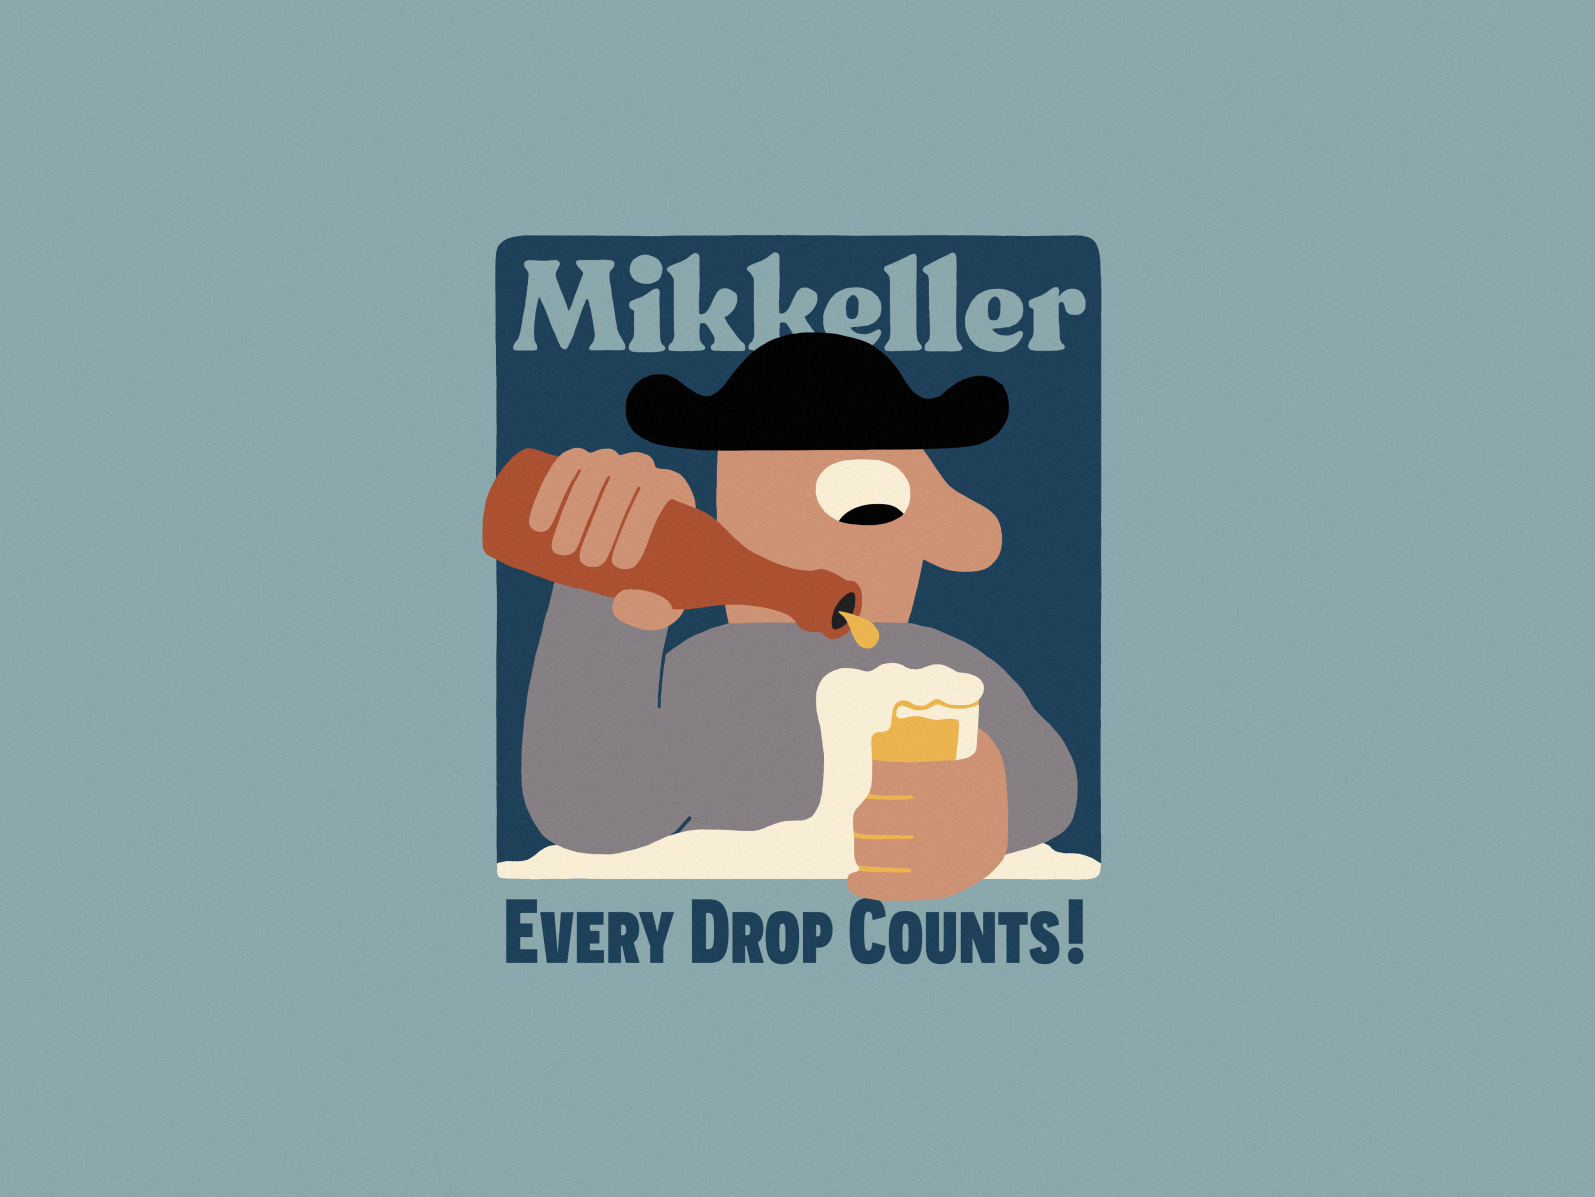 Sved papir forsvinde Every Drop Counts by Luke Cloran on Dribbble